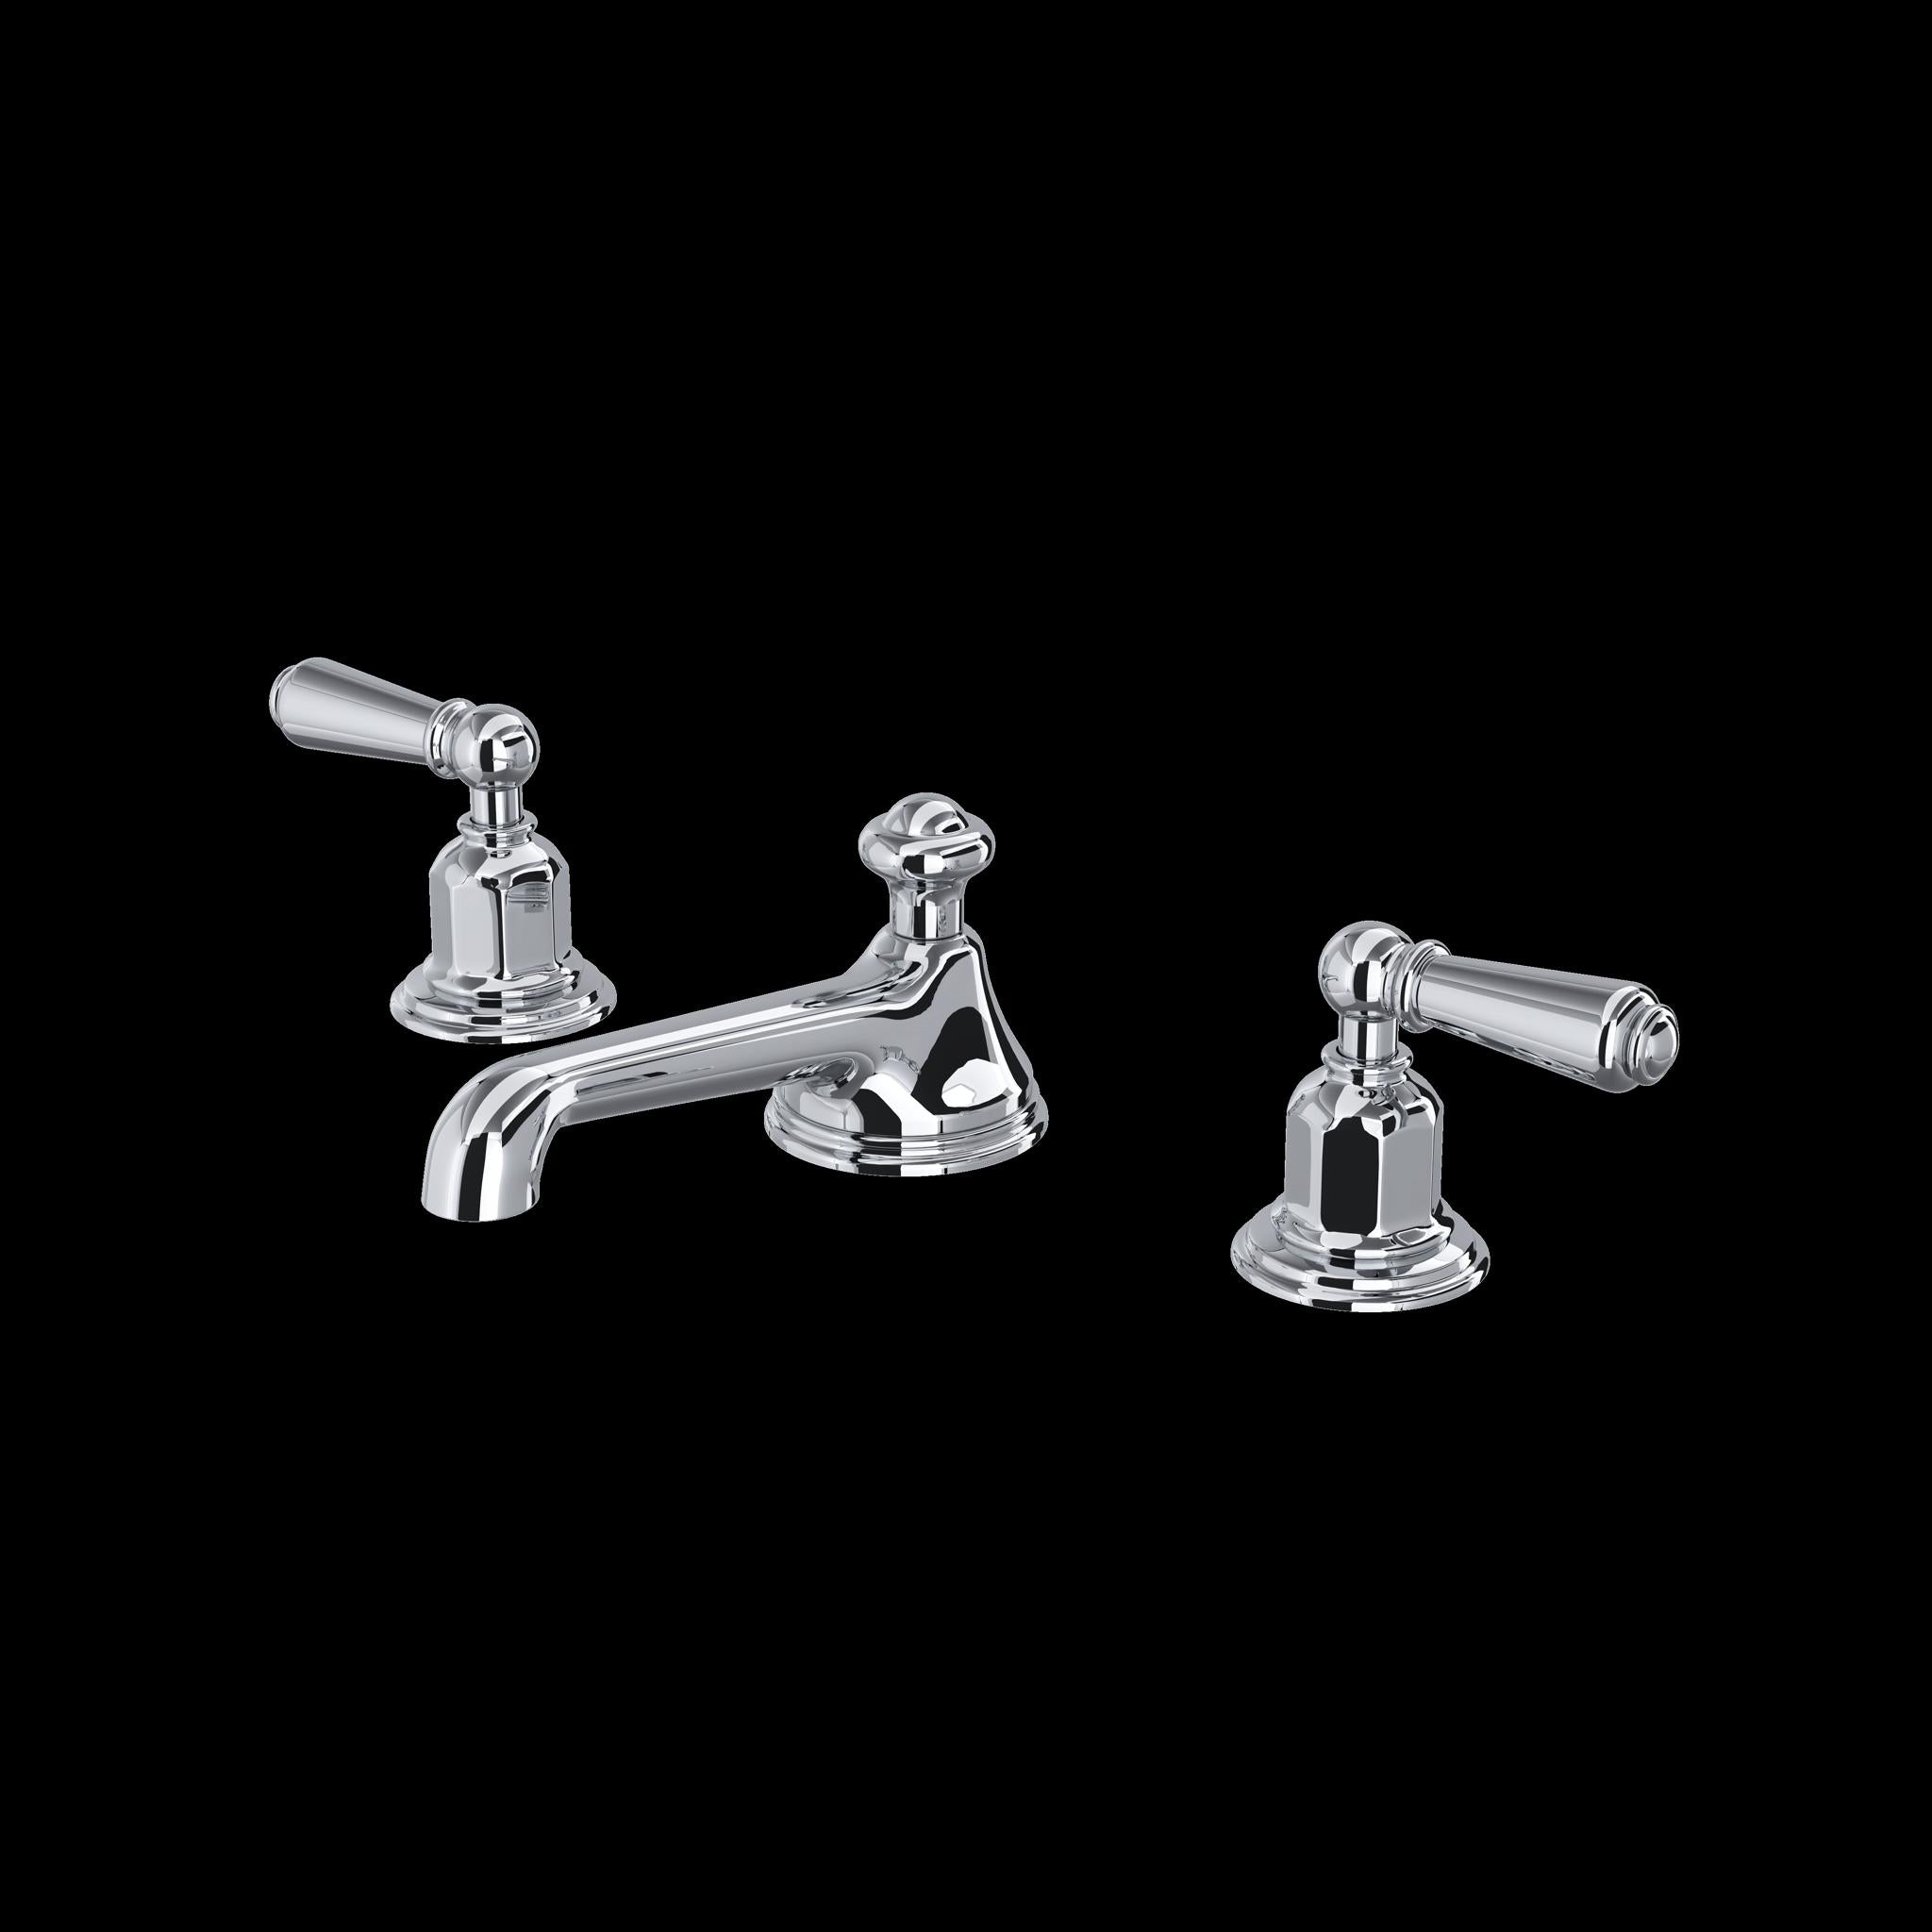 Perrin & Rowe U.3705 Edwardian Widespread Lavatory Faucet With Low Spout